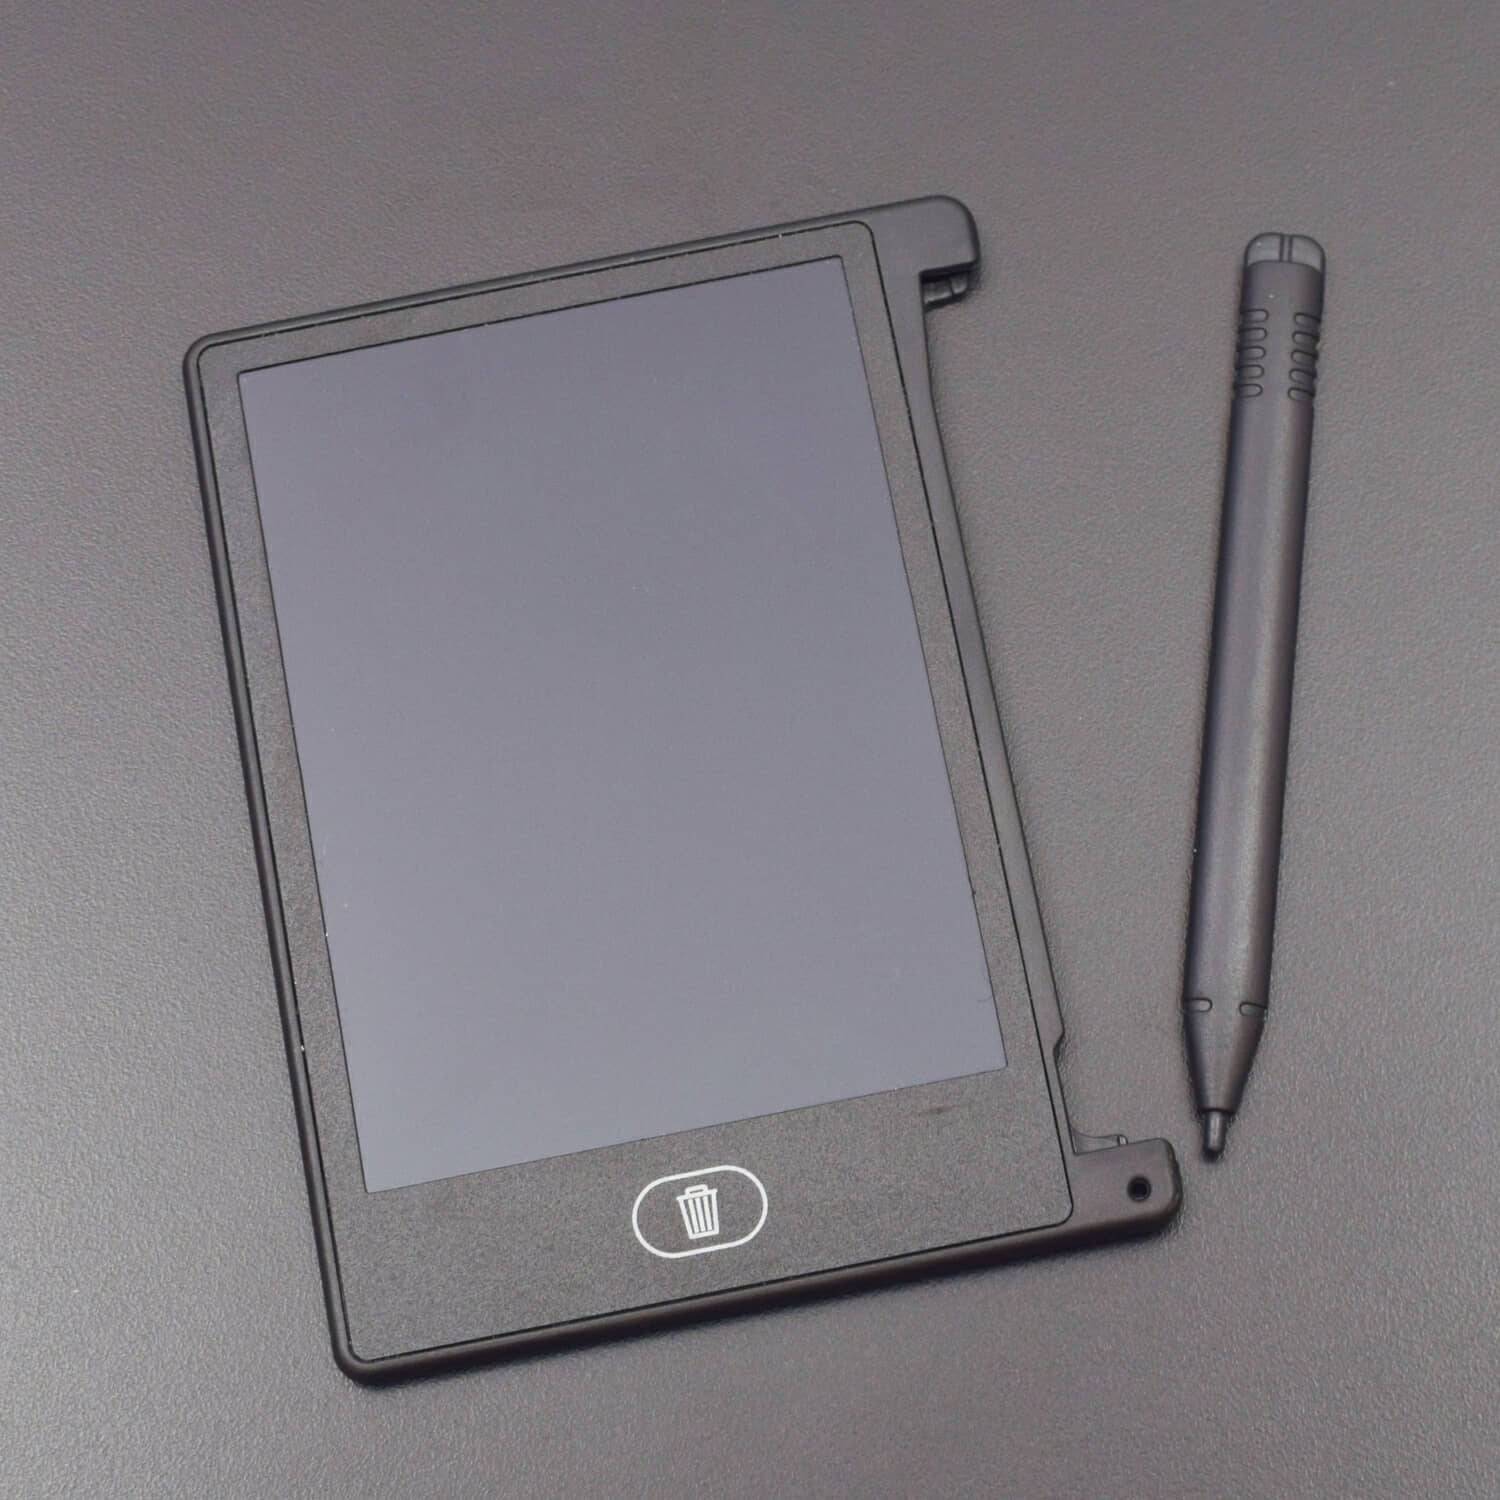 4.4 inch Mini Writing Tablet Digital LCD Drawing Notepad Electronic Practice Handwriting Painting Tablet - RS1748 - REES52